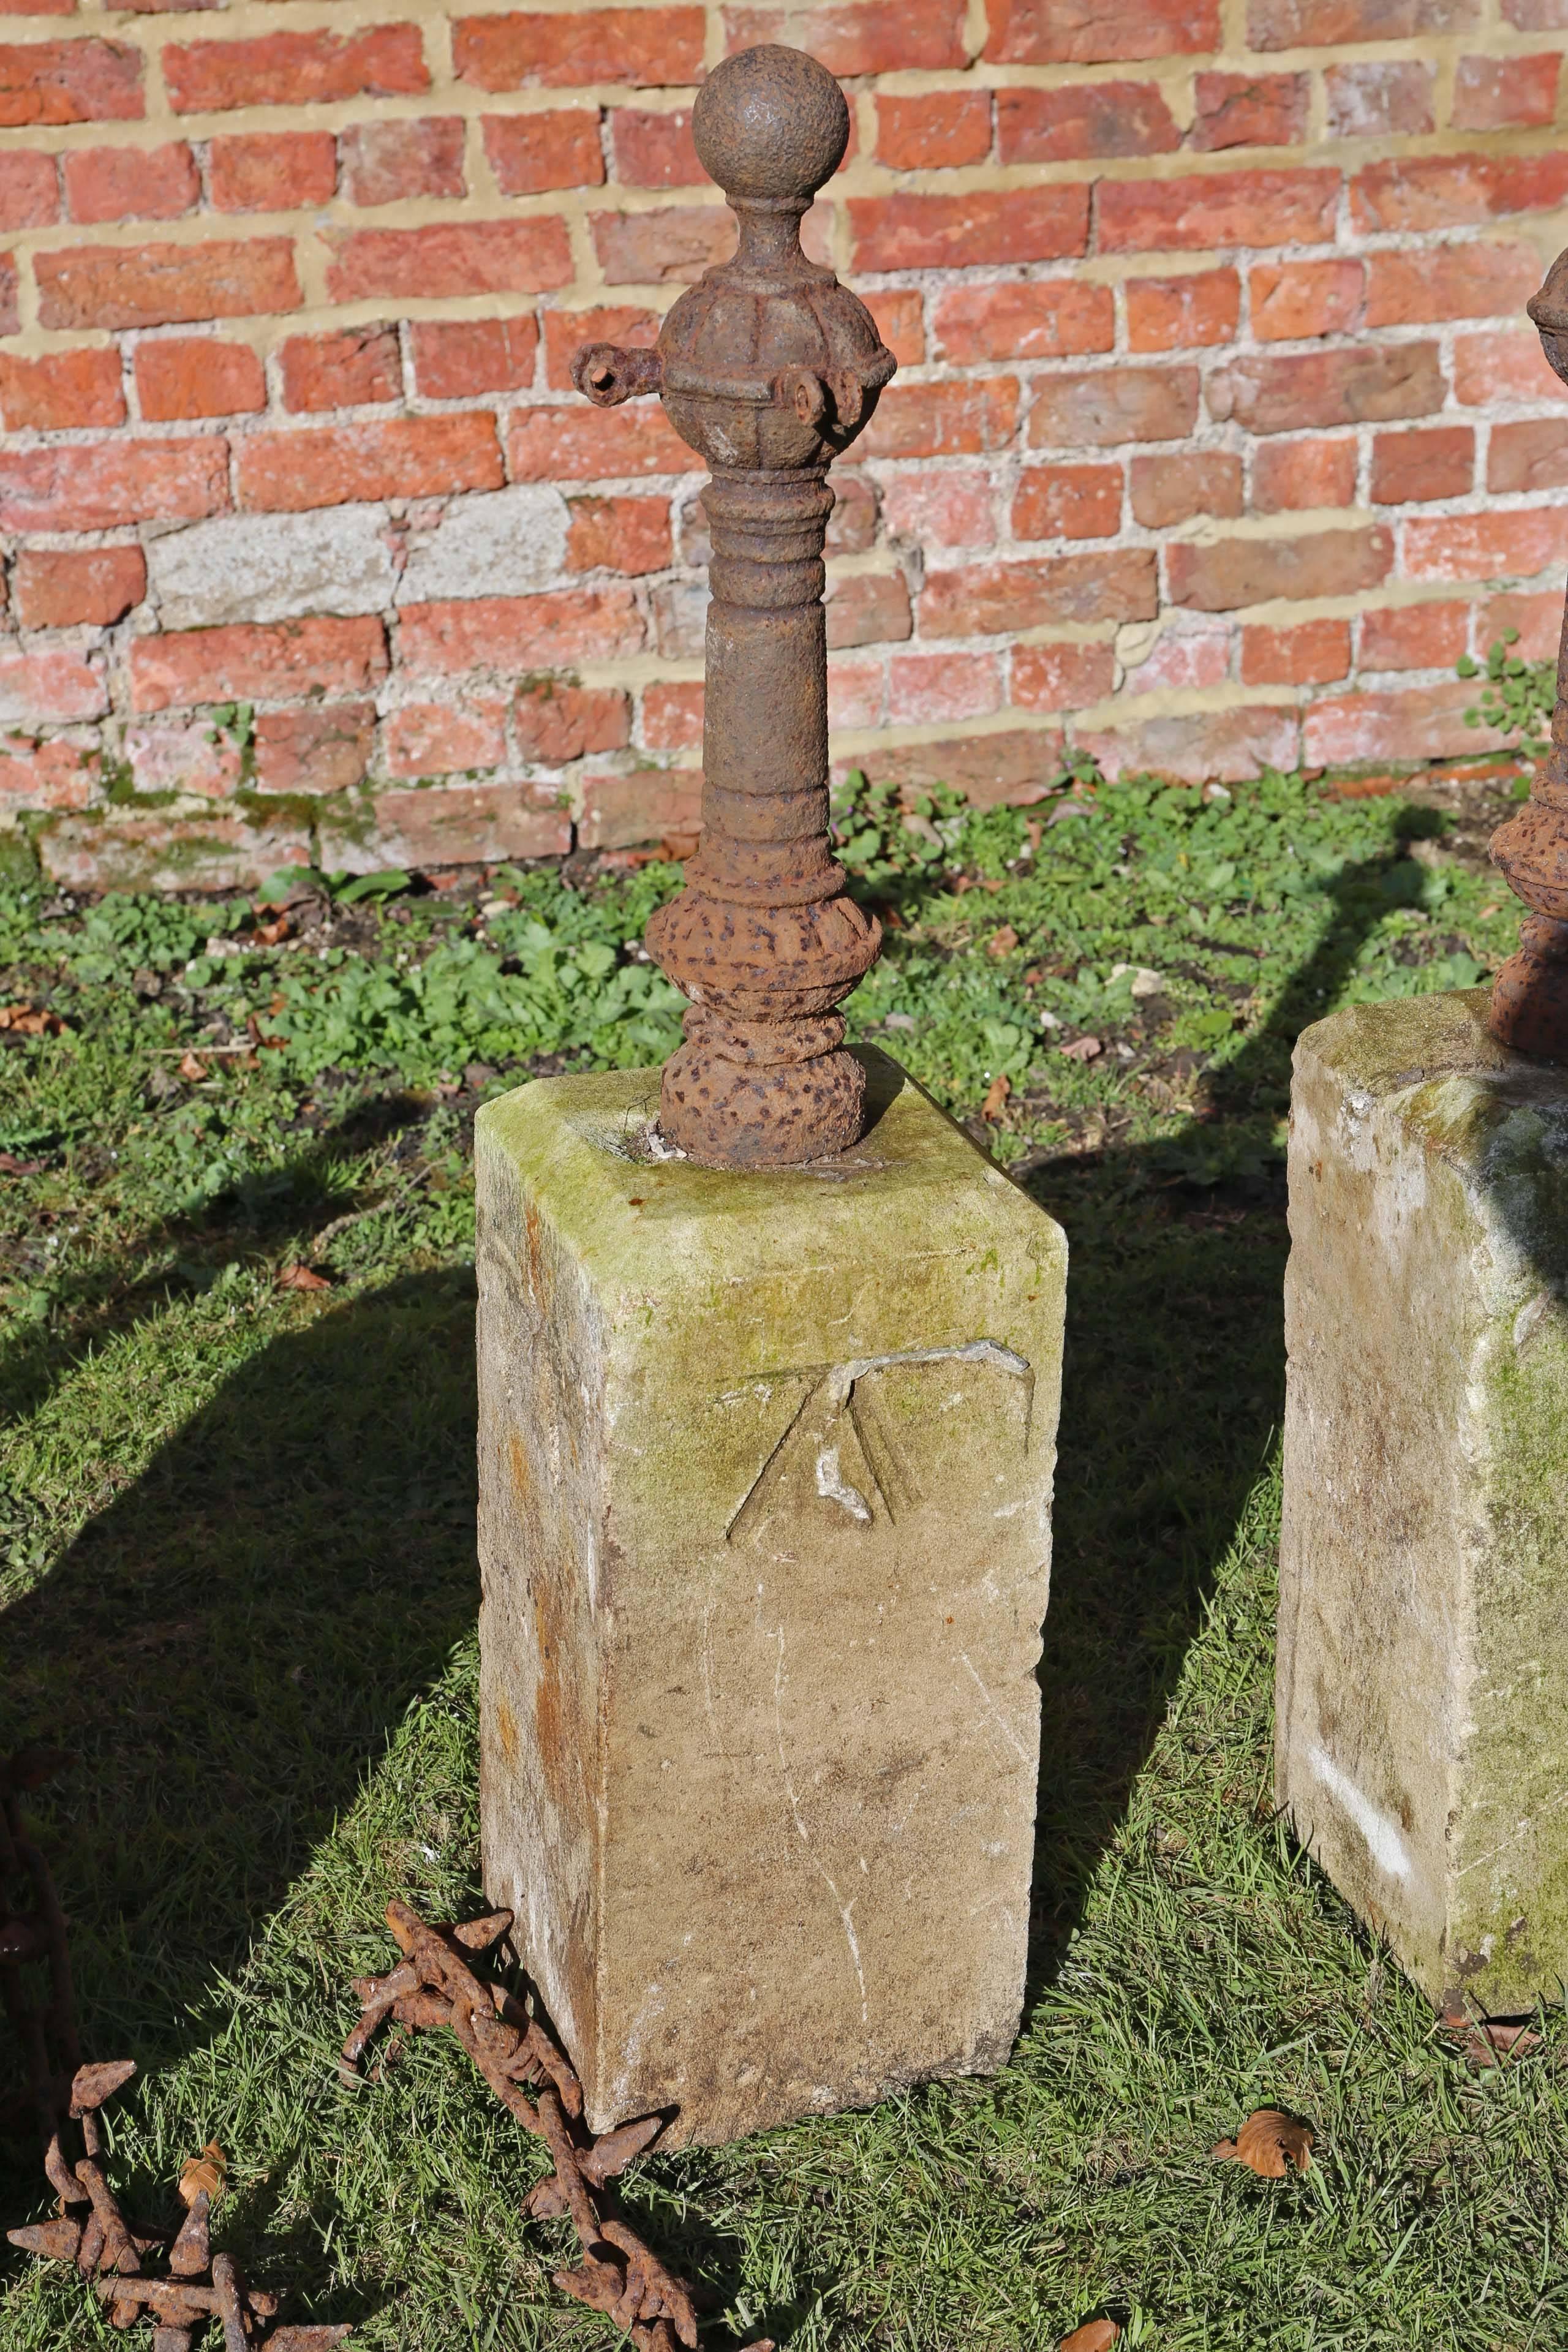 Antique Set of Seven Cast Iron Bollards with Stone Bases Lawn Driveway Edging In Good Condition For Sale In Wisbech, Walton Wisbech